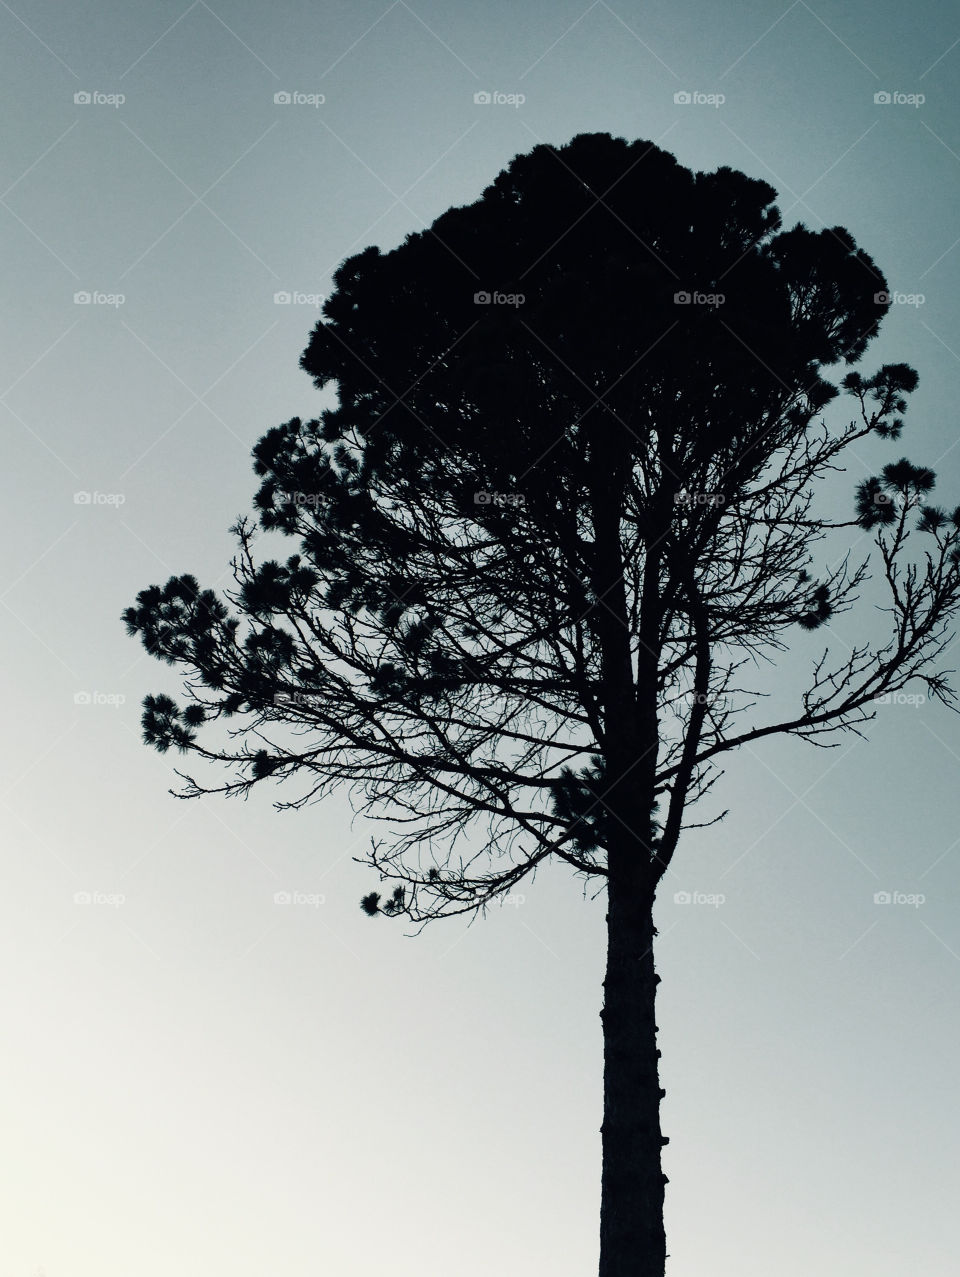 Stand alone. A silhouette of a pine tree on tke background of evening sky.